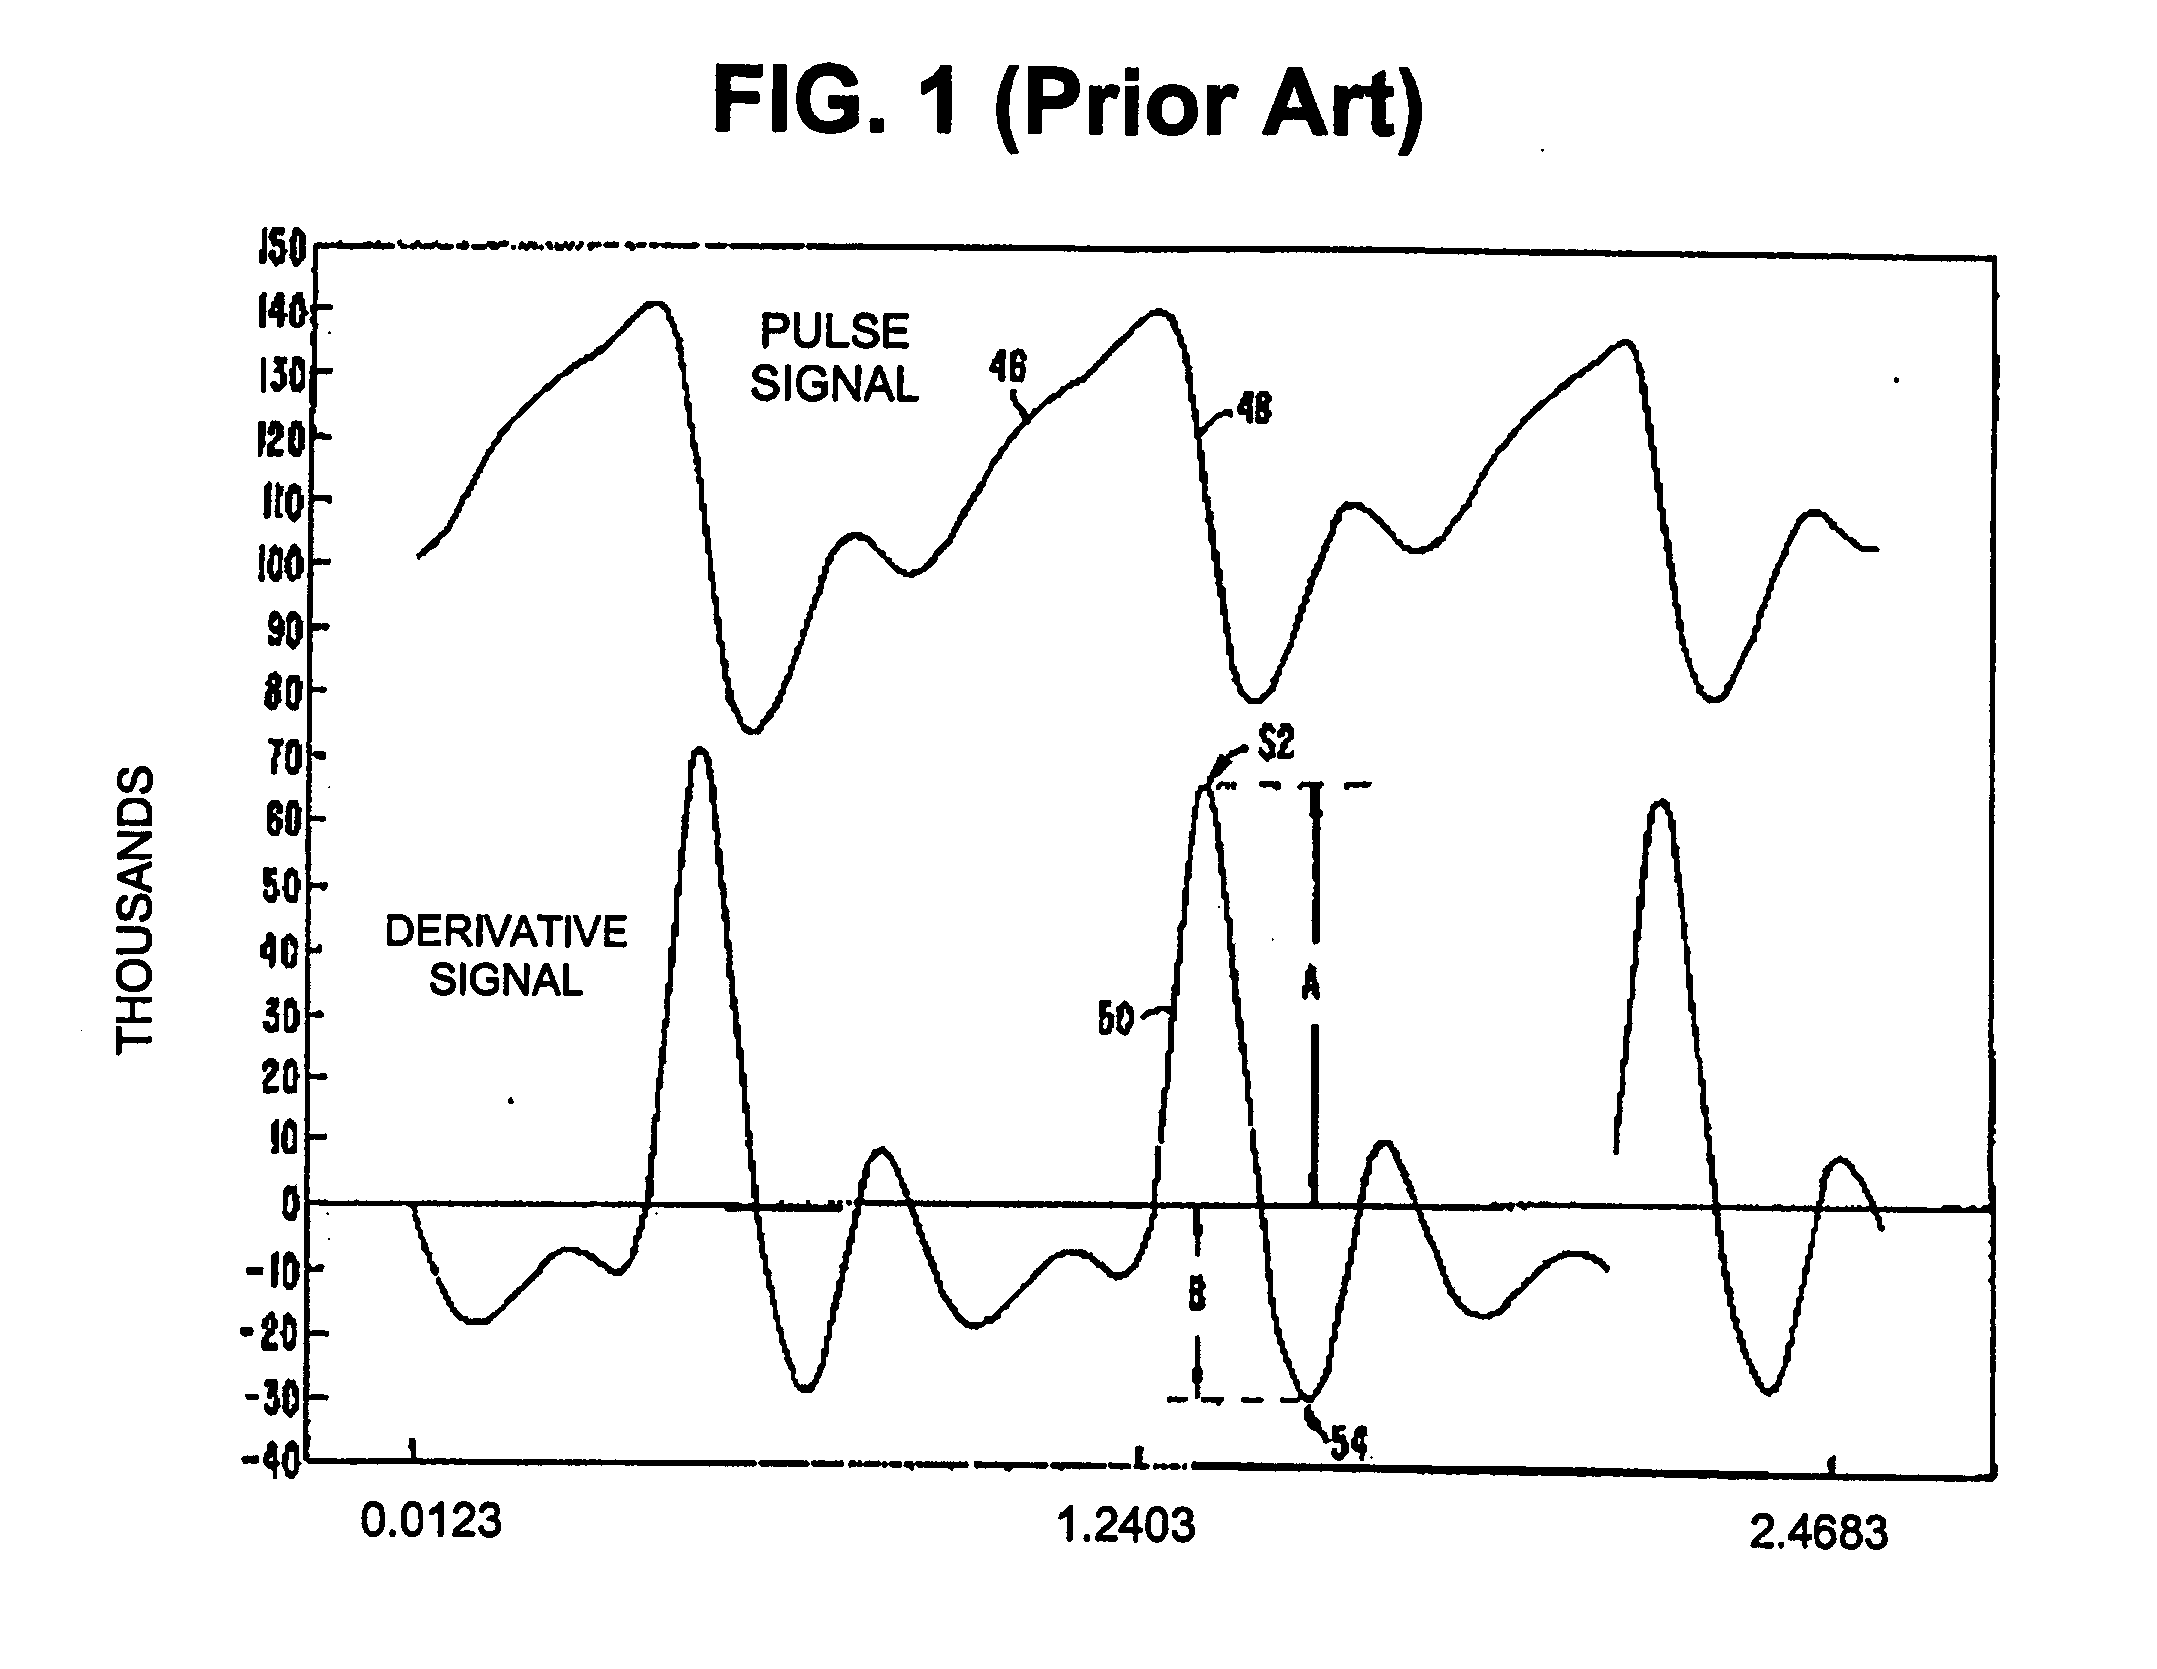 Apparatus and method for detecting blood flow signal free from motion artifact and stress test apparatus using the same